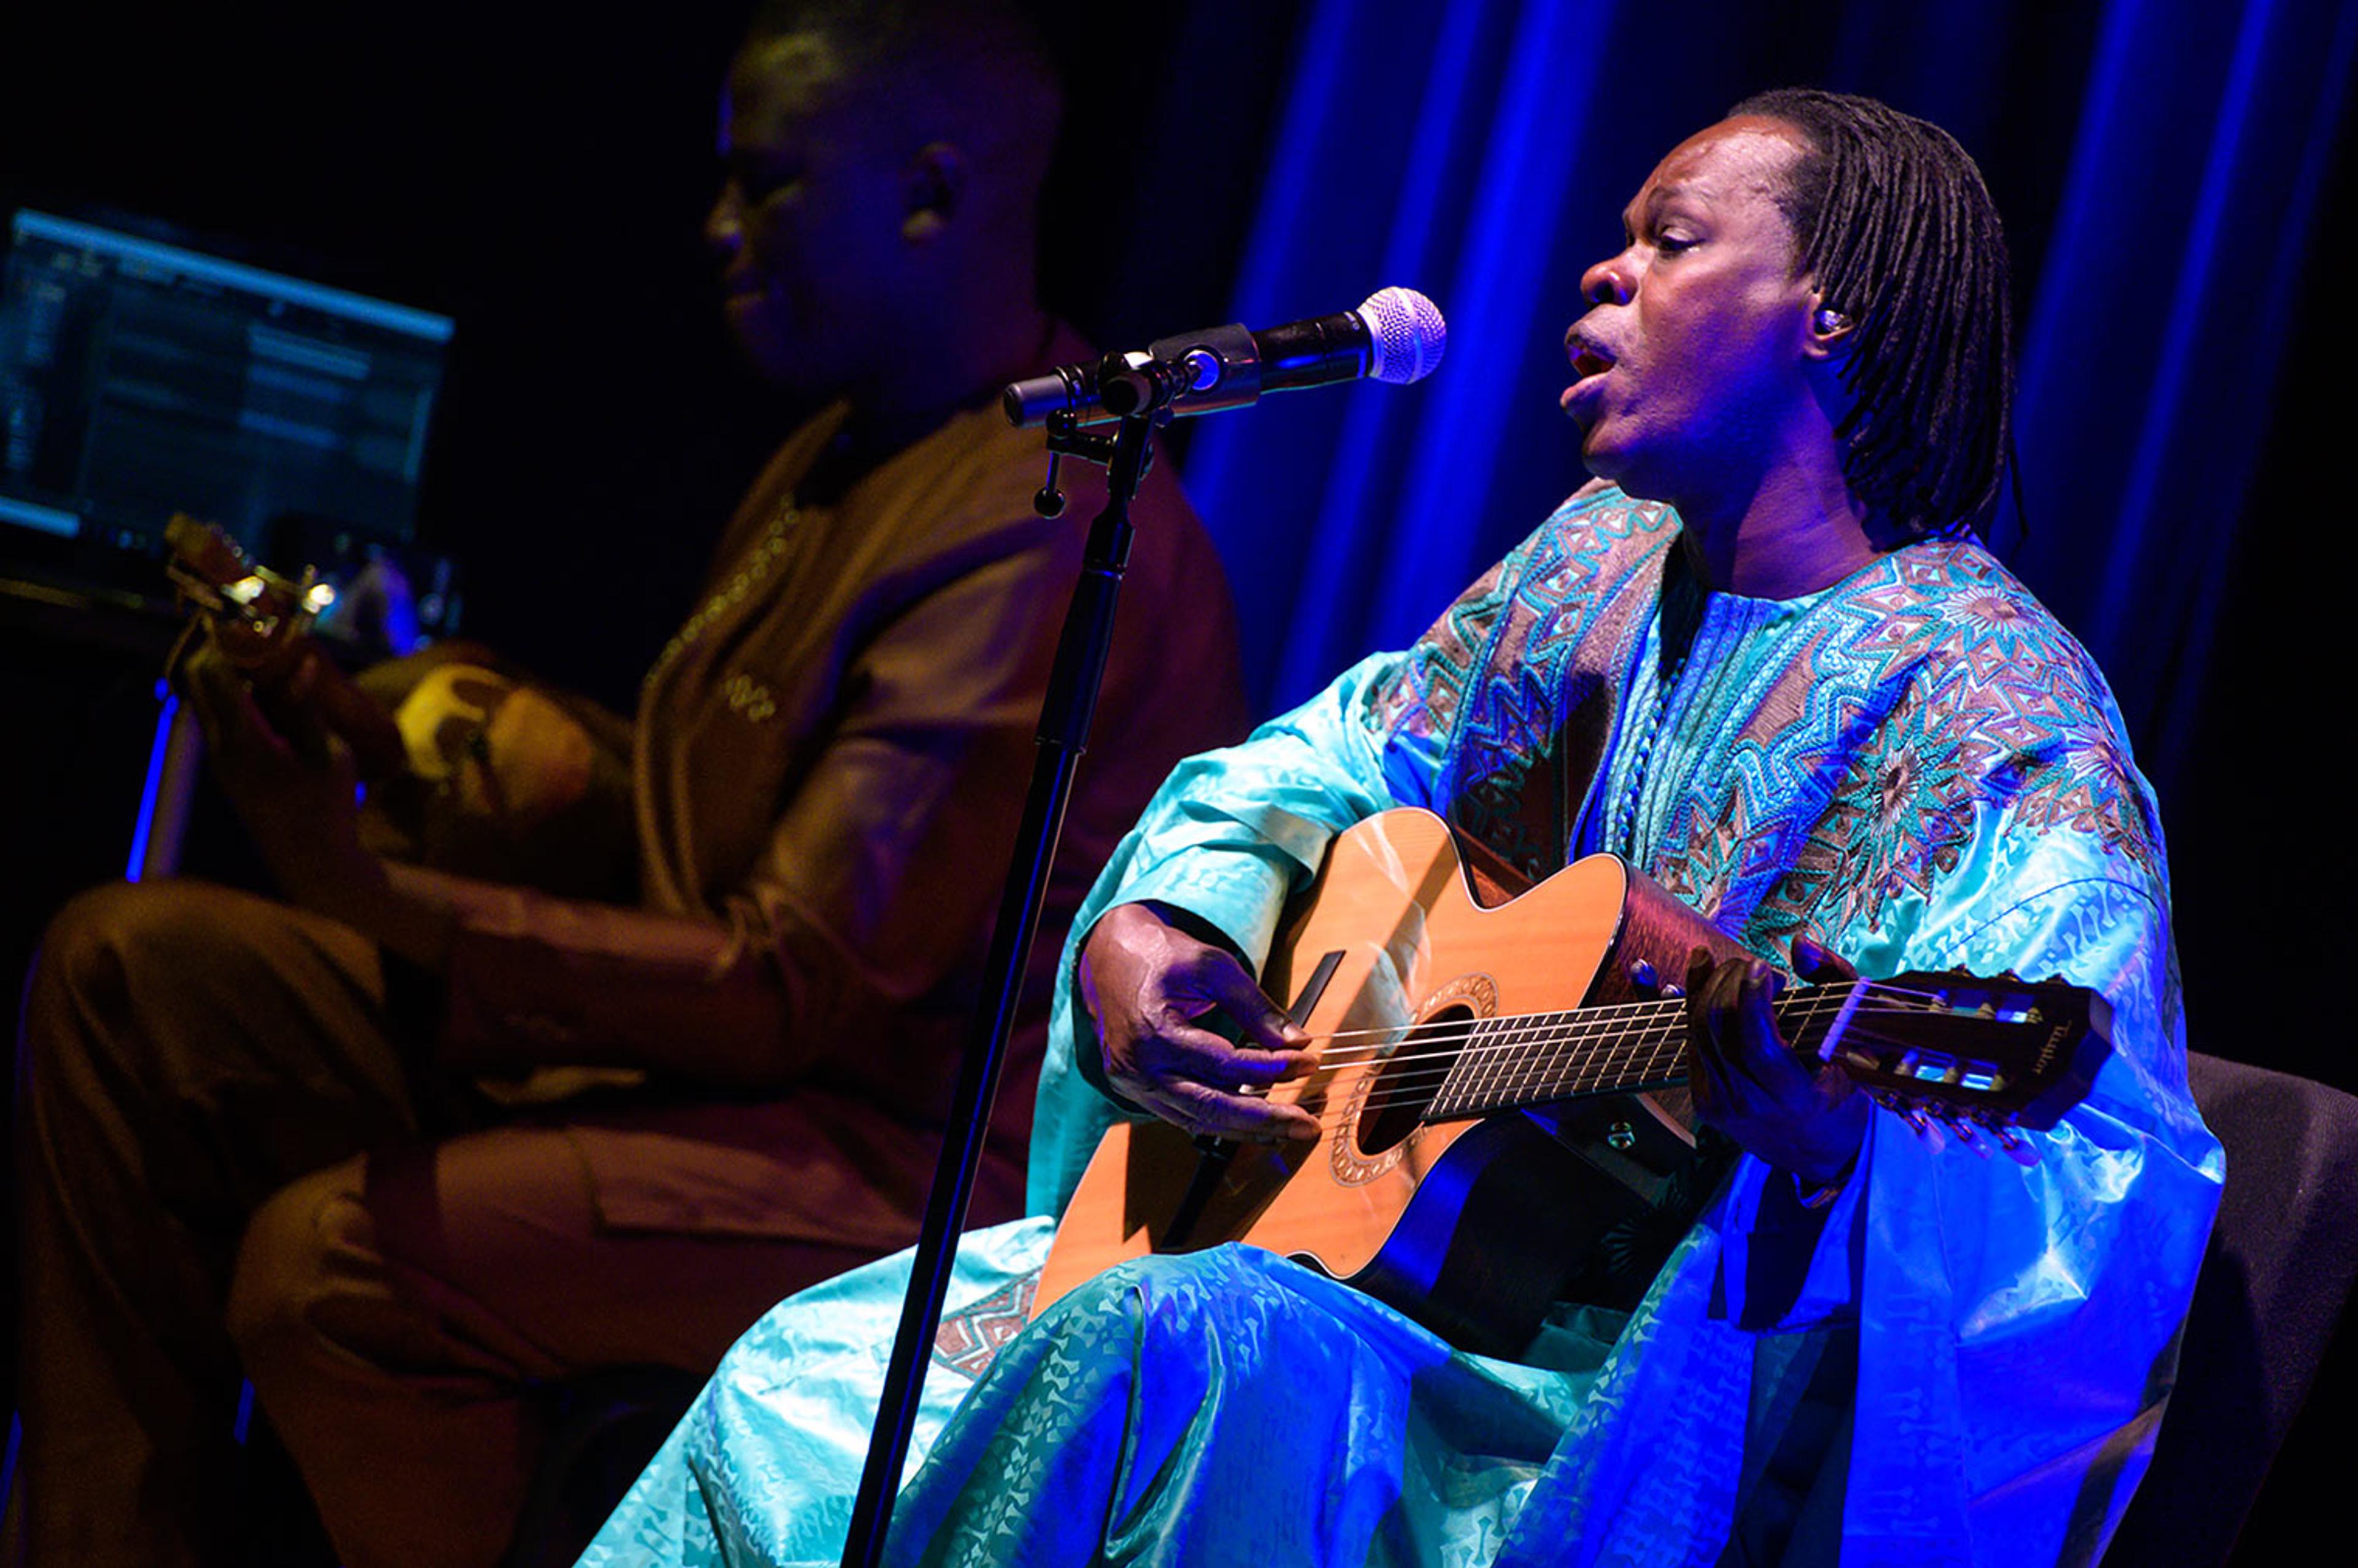 Senegalese singer Baaba Maal, in blue, performs an acoustic concert with Cheikh Ndiaye (left) at The Met.